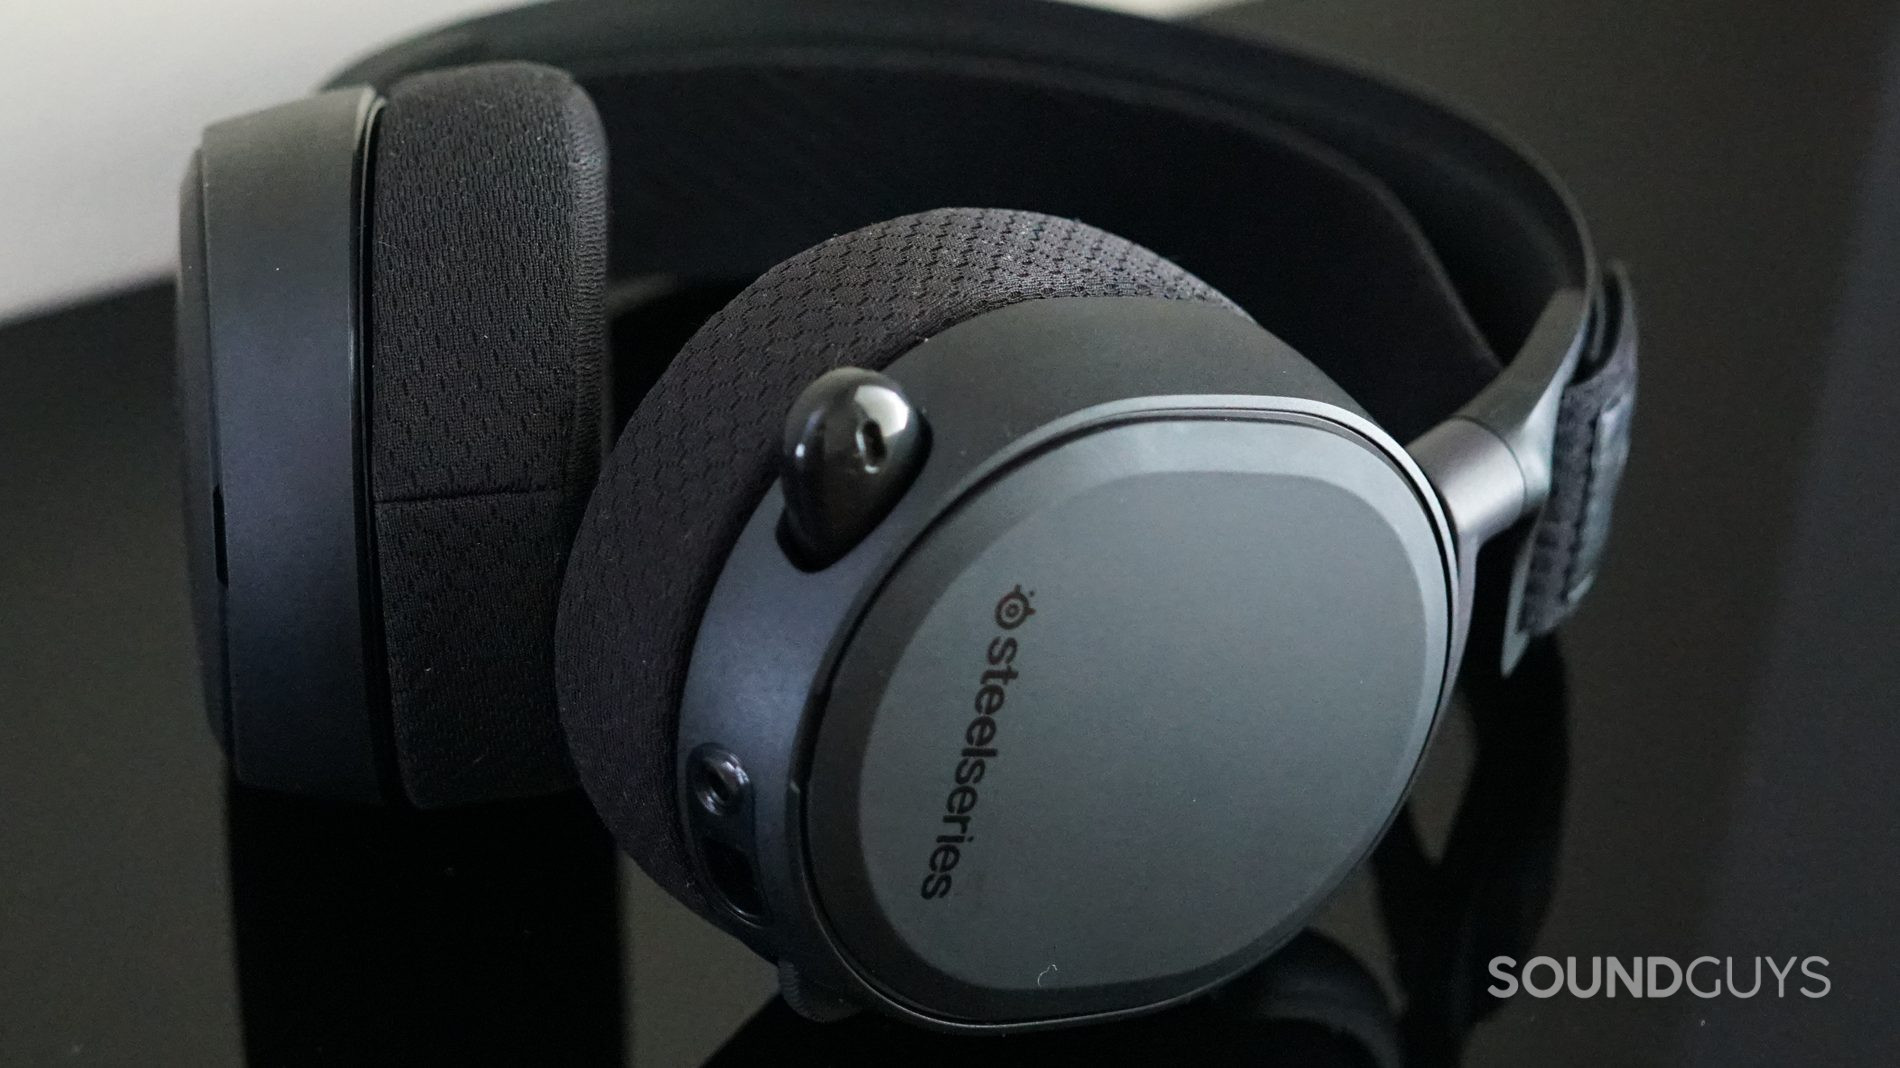 The SteelSeries Arctis Pro + GameDAC headset in black against a black reflective surface.